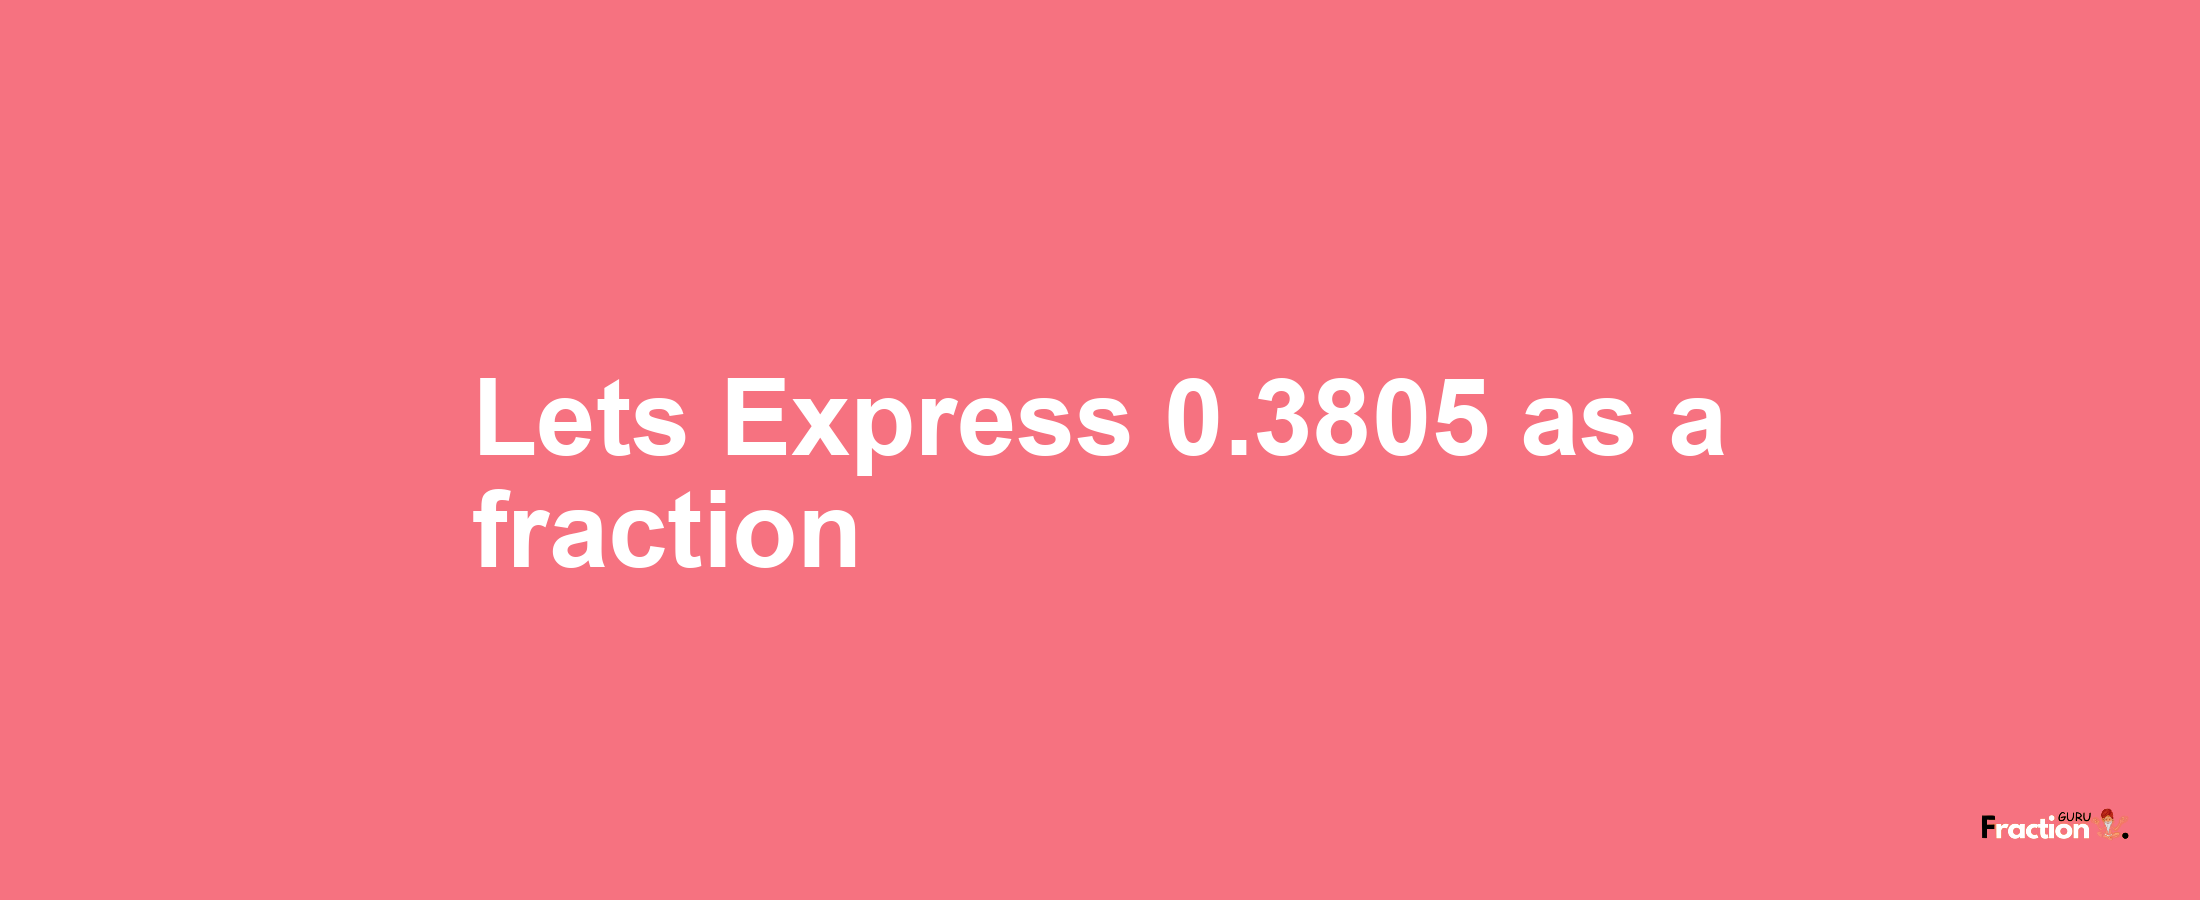 Lets Express 0.3805 as afraction